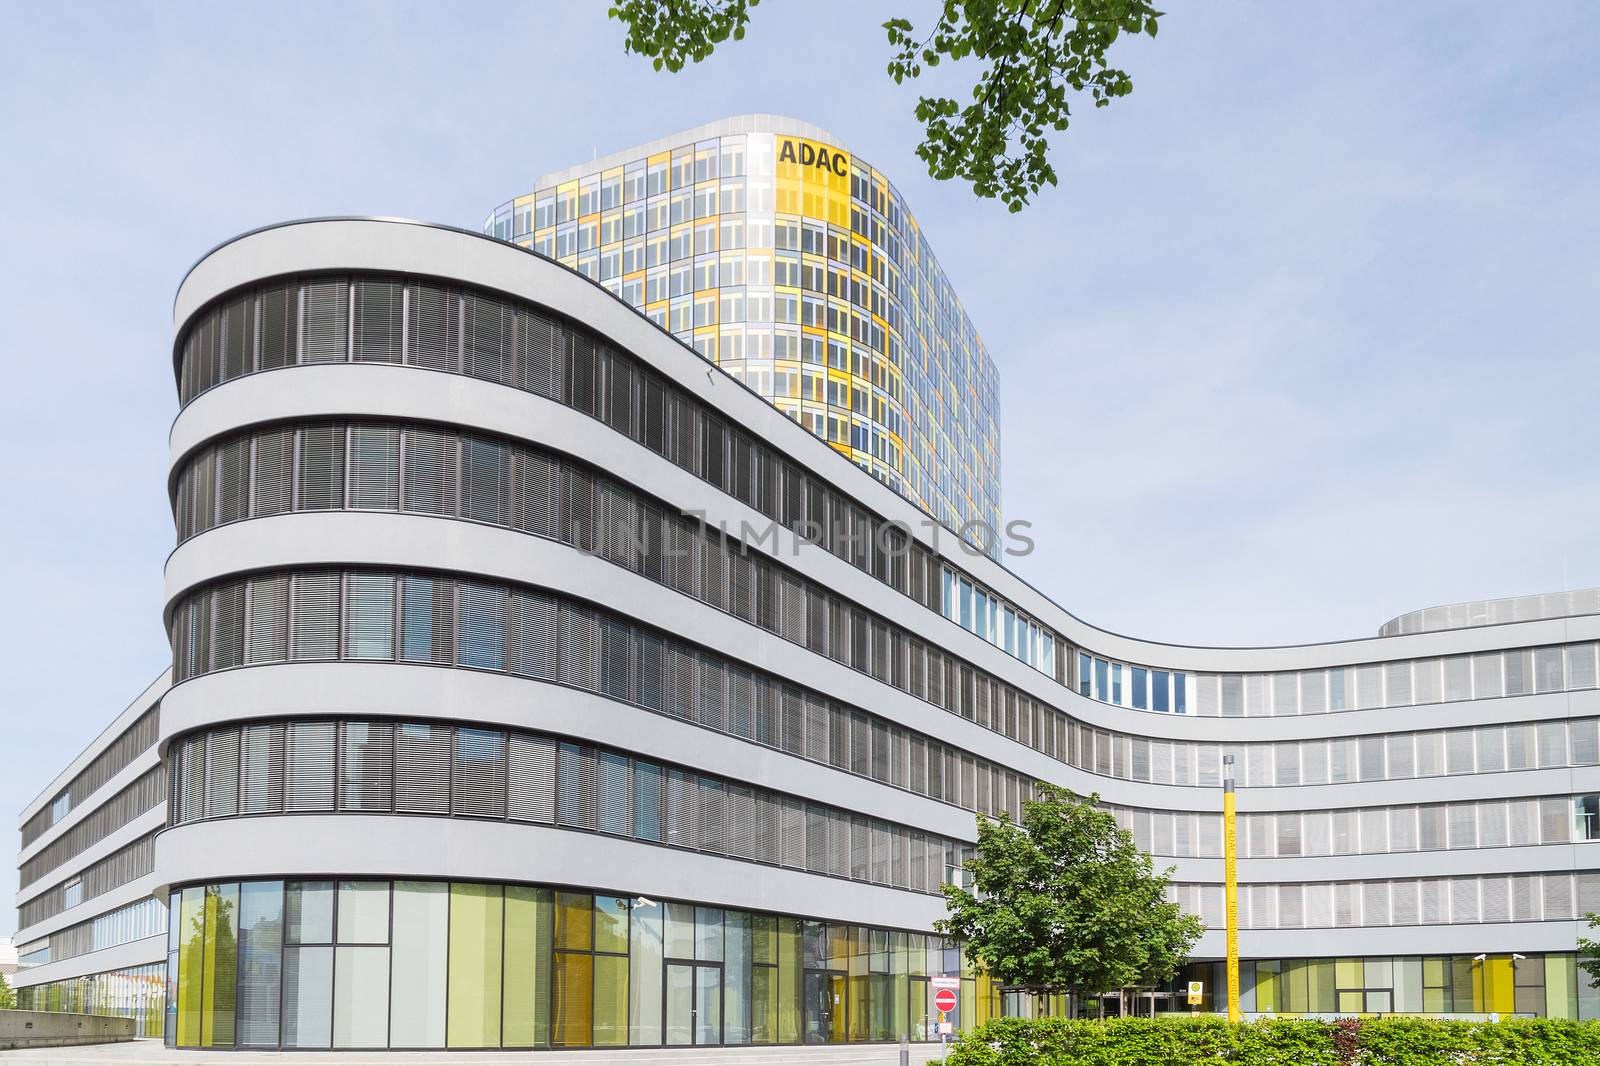 Munich, Germany - May 12, 2015: New headquarters of German car owners association. ADAC is an automobile club providing emergency rescue and technical repair services on European roads.